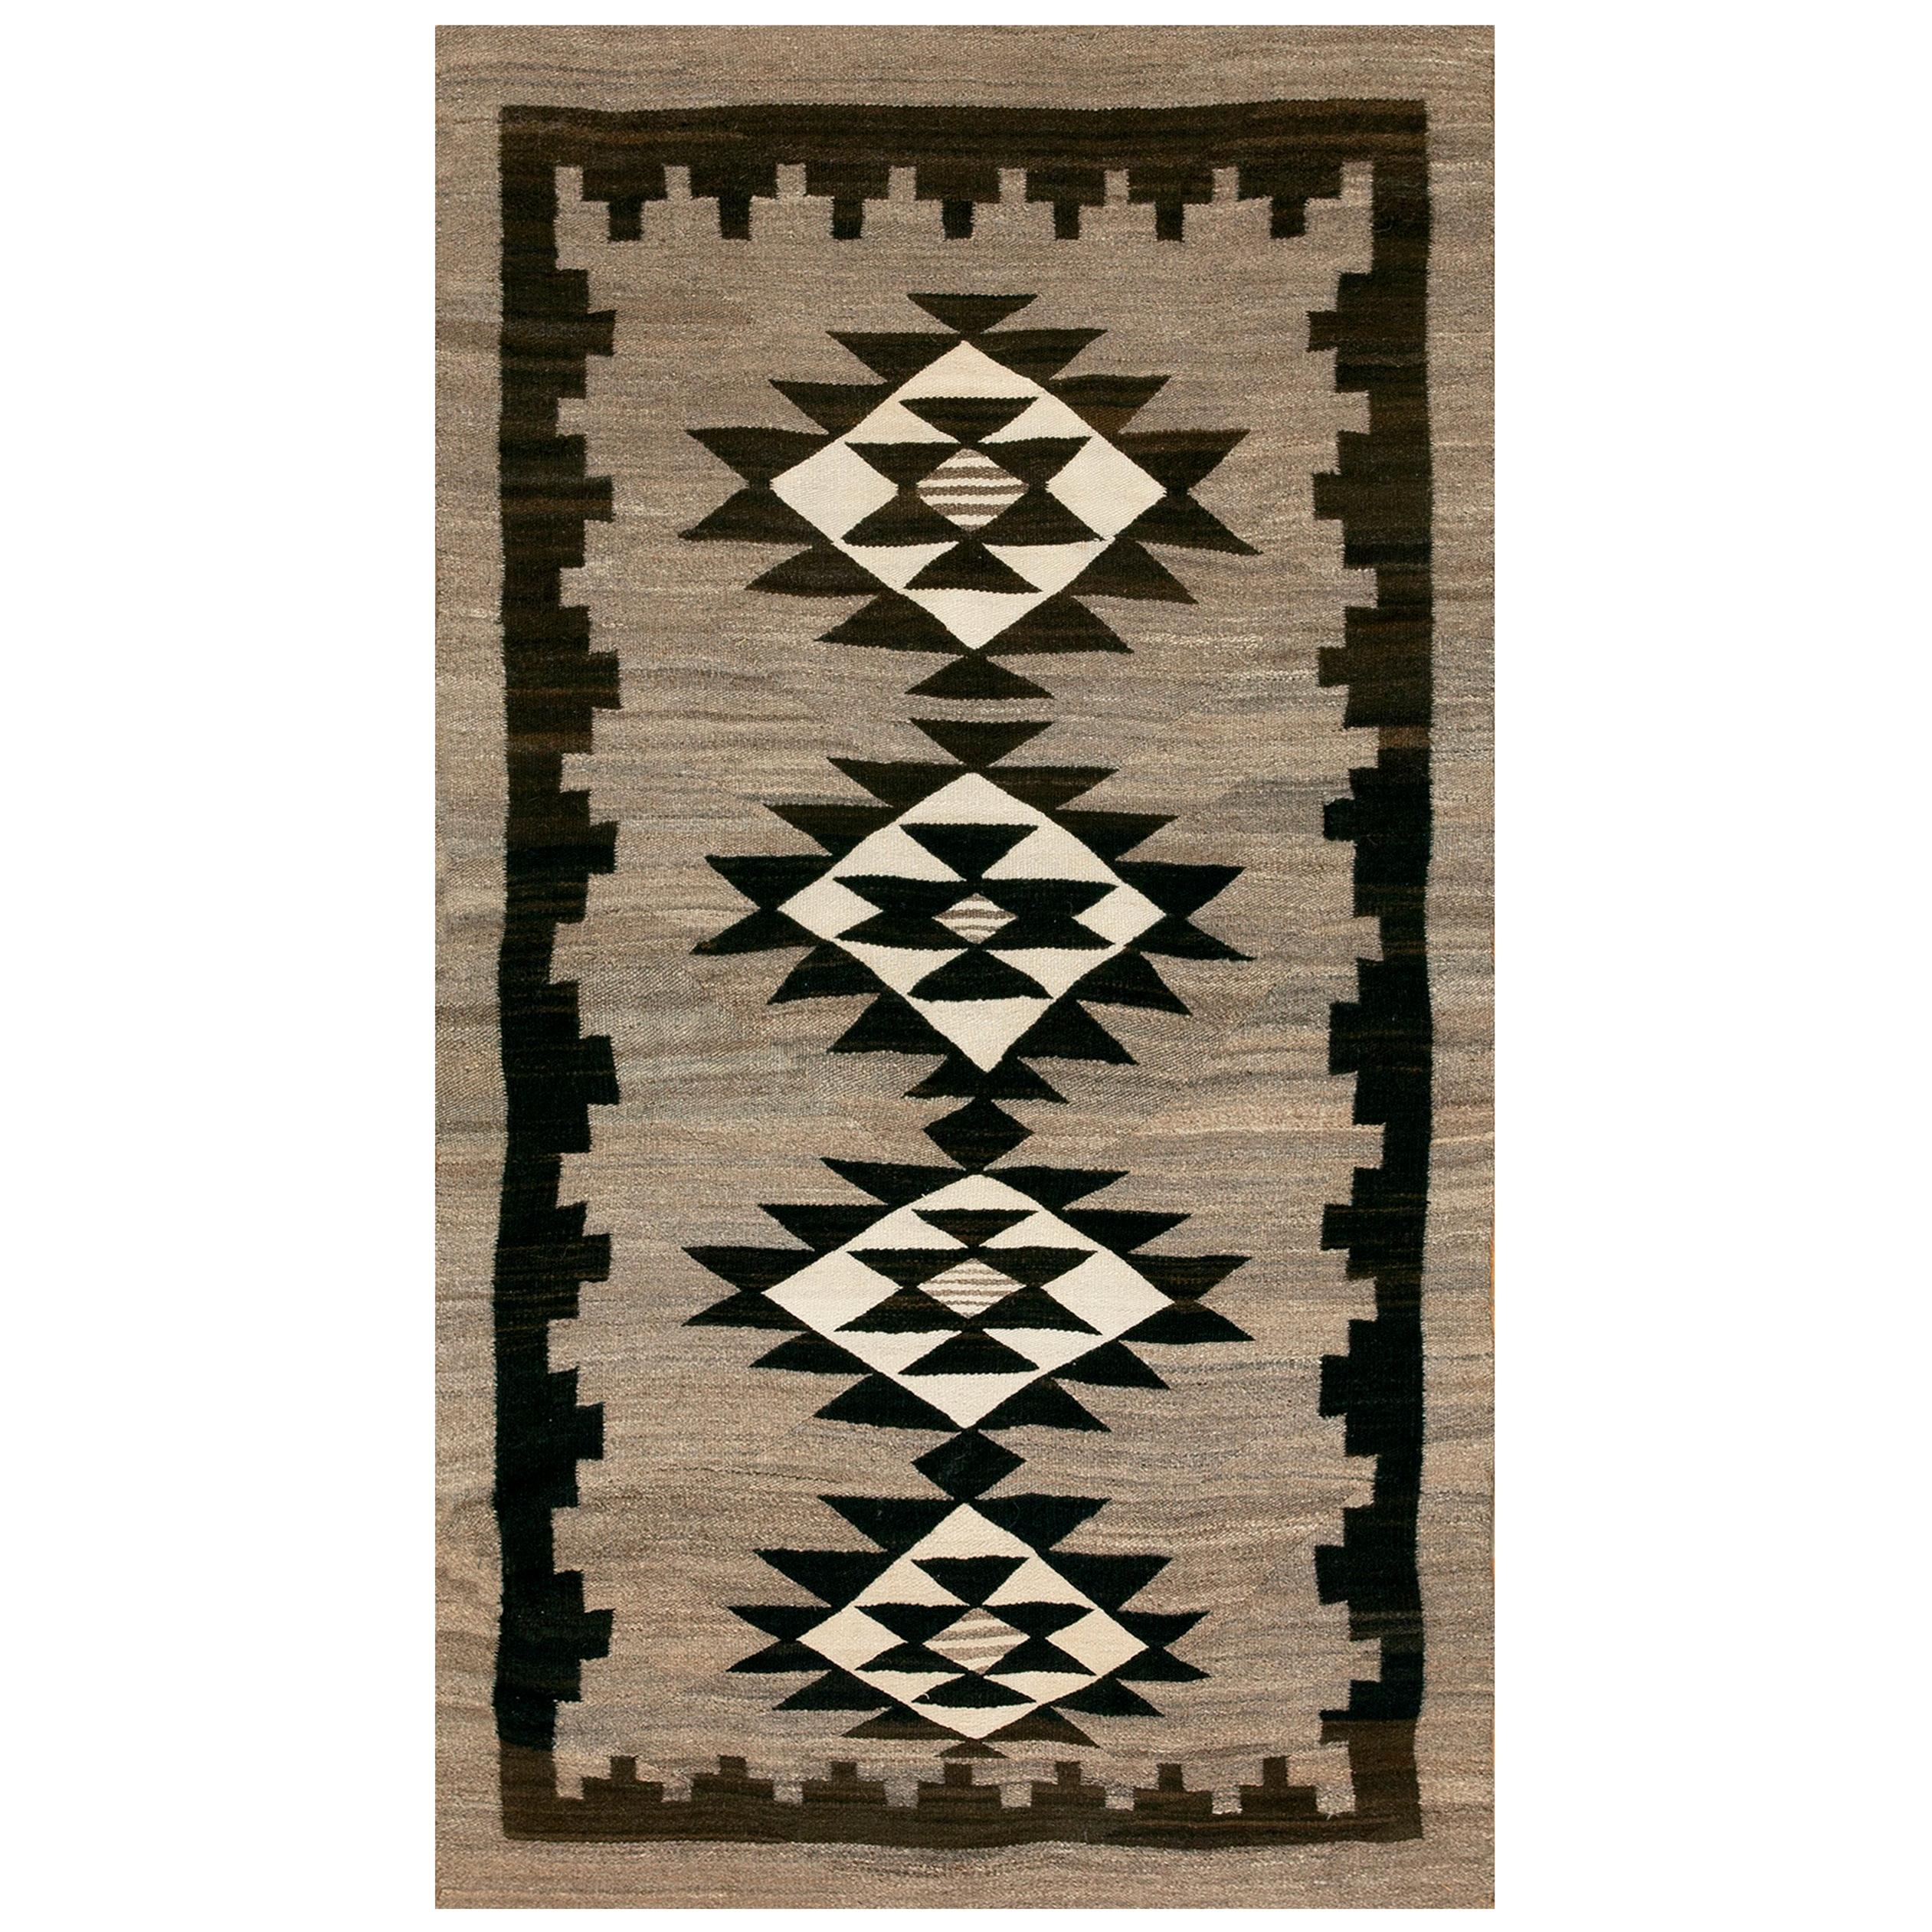 Early 20th Century American Navajo Two Grey Hills Carpet ( 4' x 7' - 122 x 213 ) For Sale